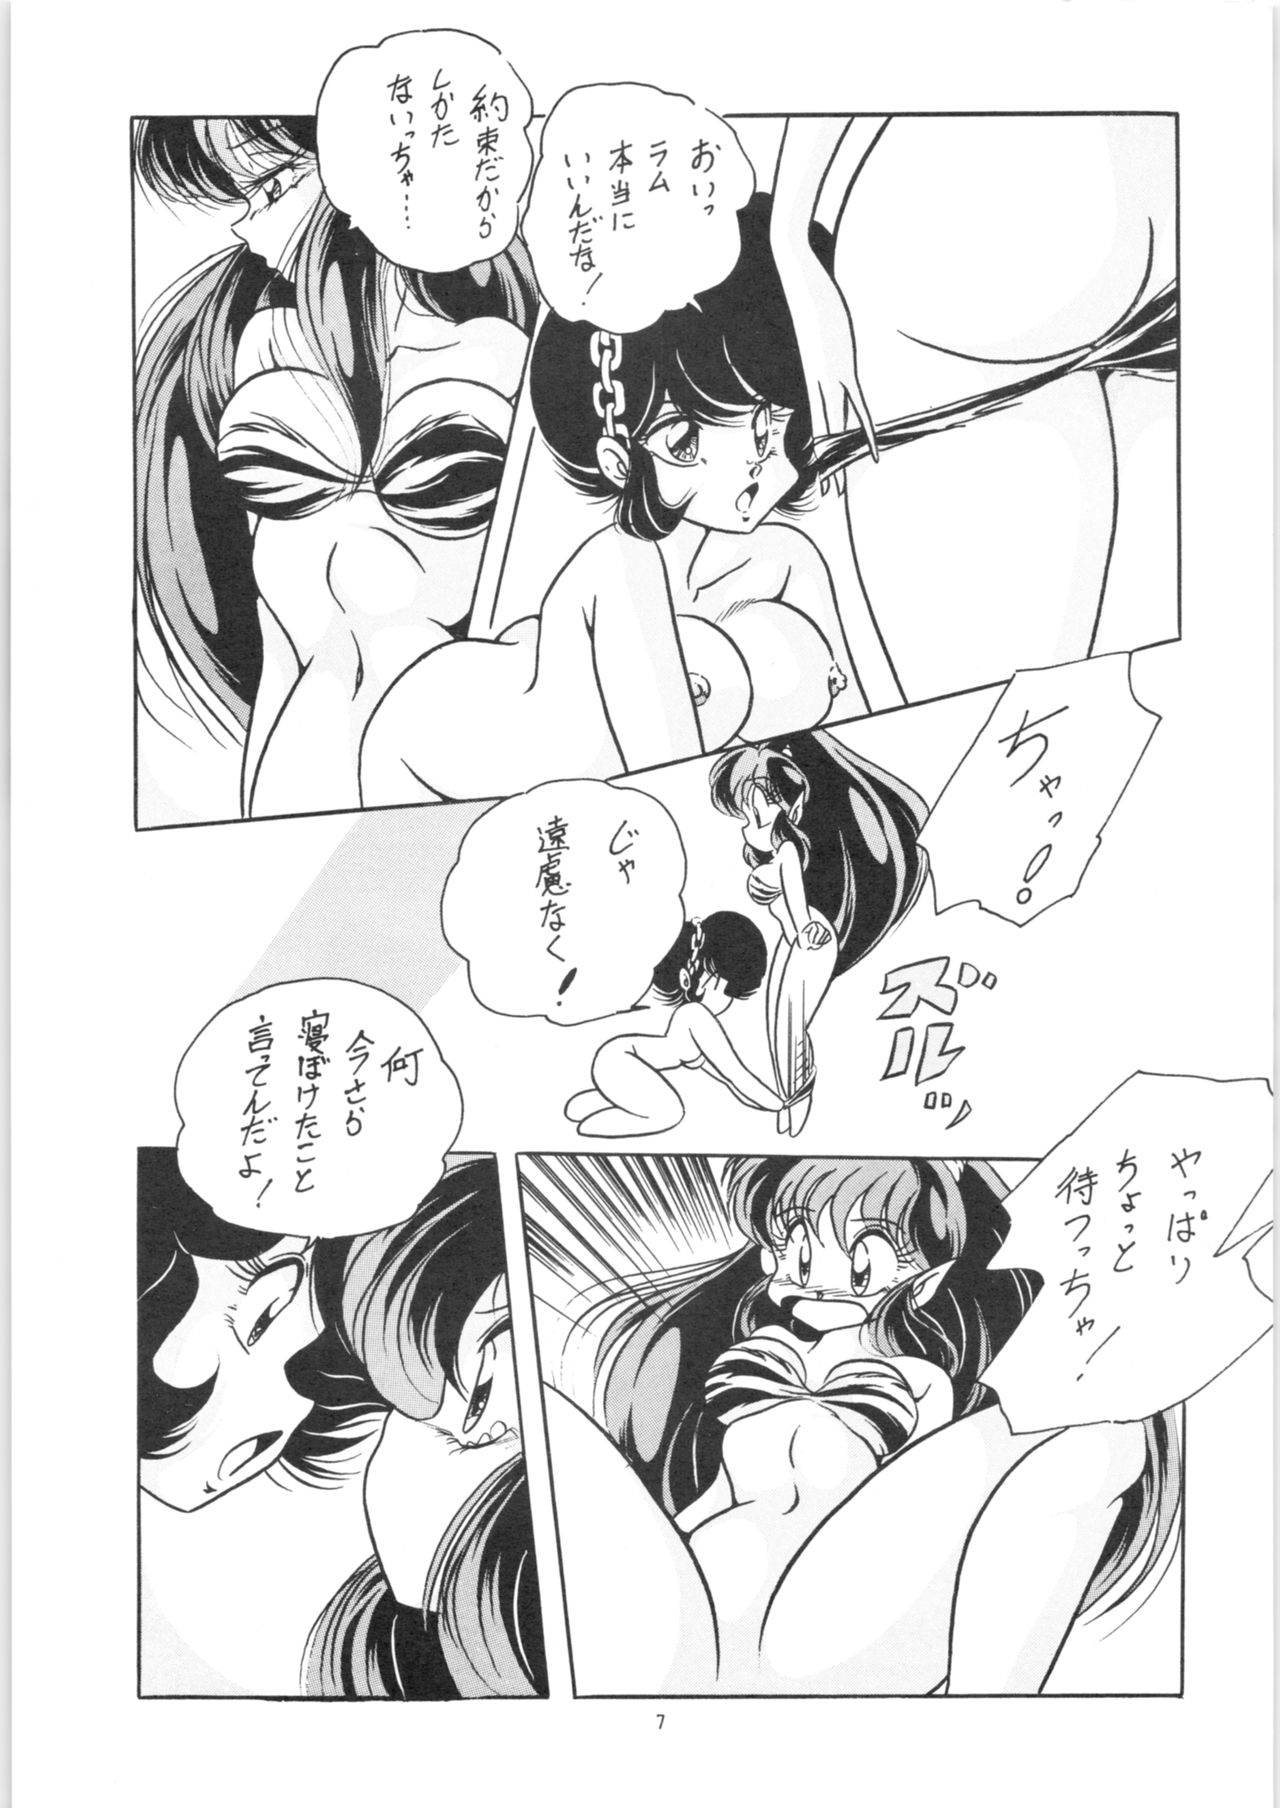 [C-COMPANY] C-COMPANY SPECIAL STAGE 14 (Ranma 1/2) page 8 full